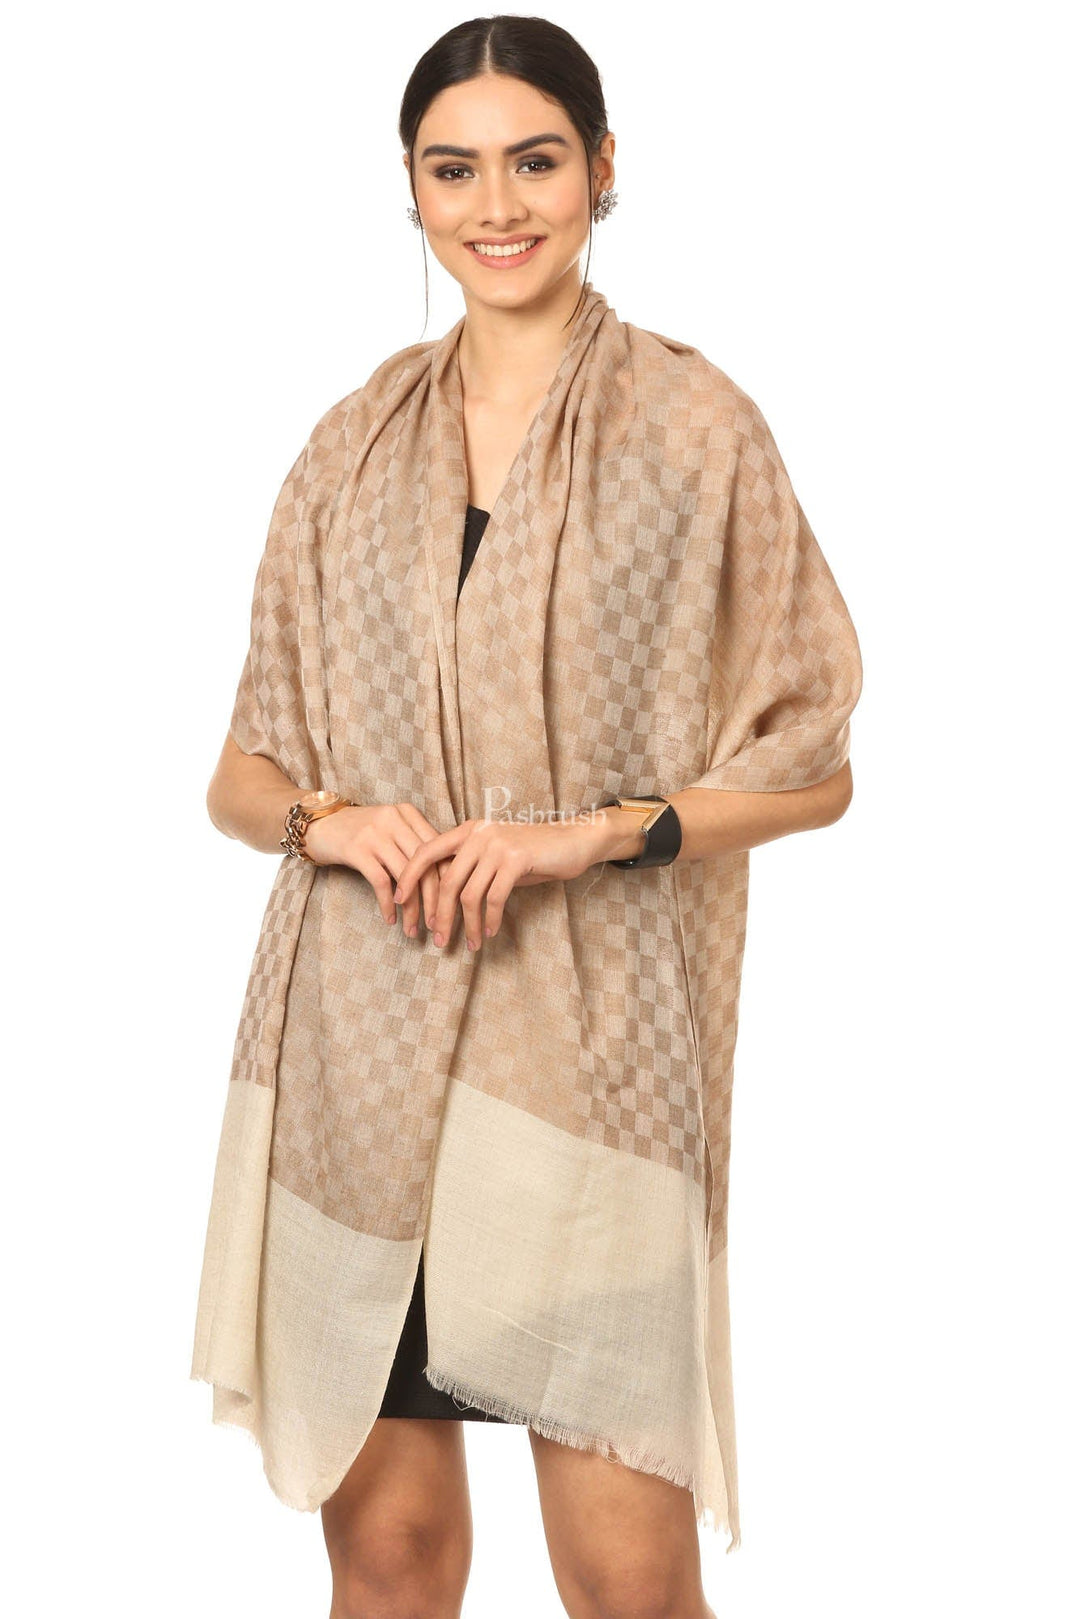 Pashtush India Womens Stoles and Scarves Scarf Pashtush Fine Wool Luxury Striped Design Scarf, Stole, Weaving Design - Beige